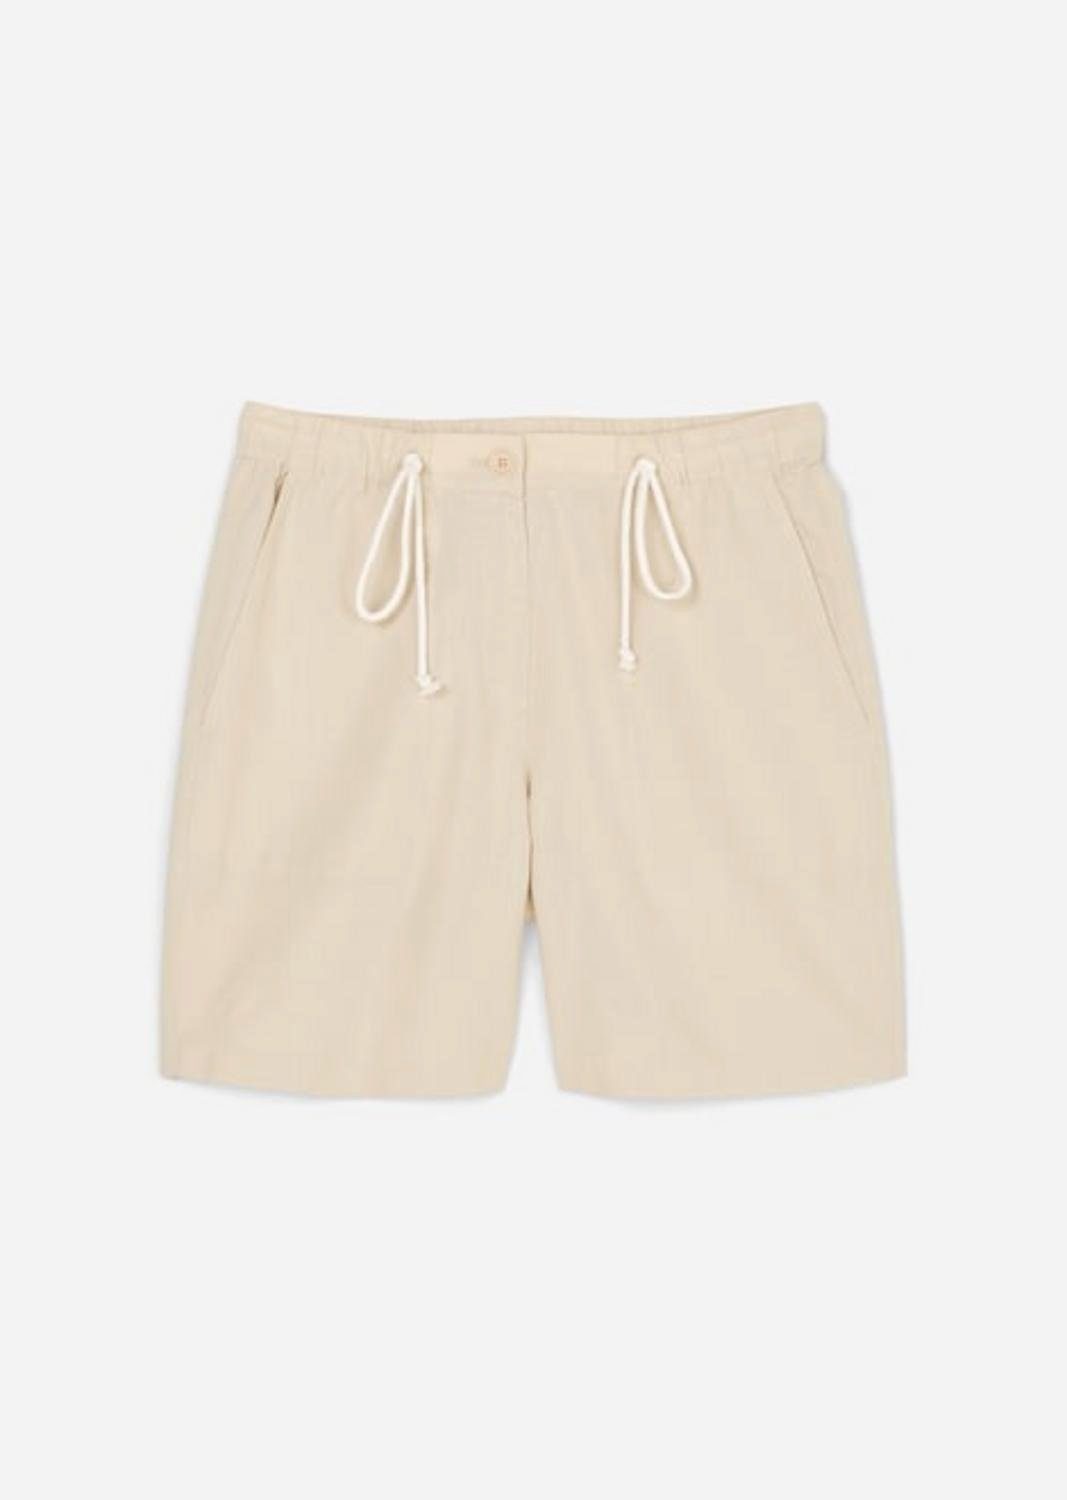 Marc O'Polo Stoffhose Shorts, relaxed jogging style, mid